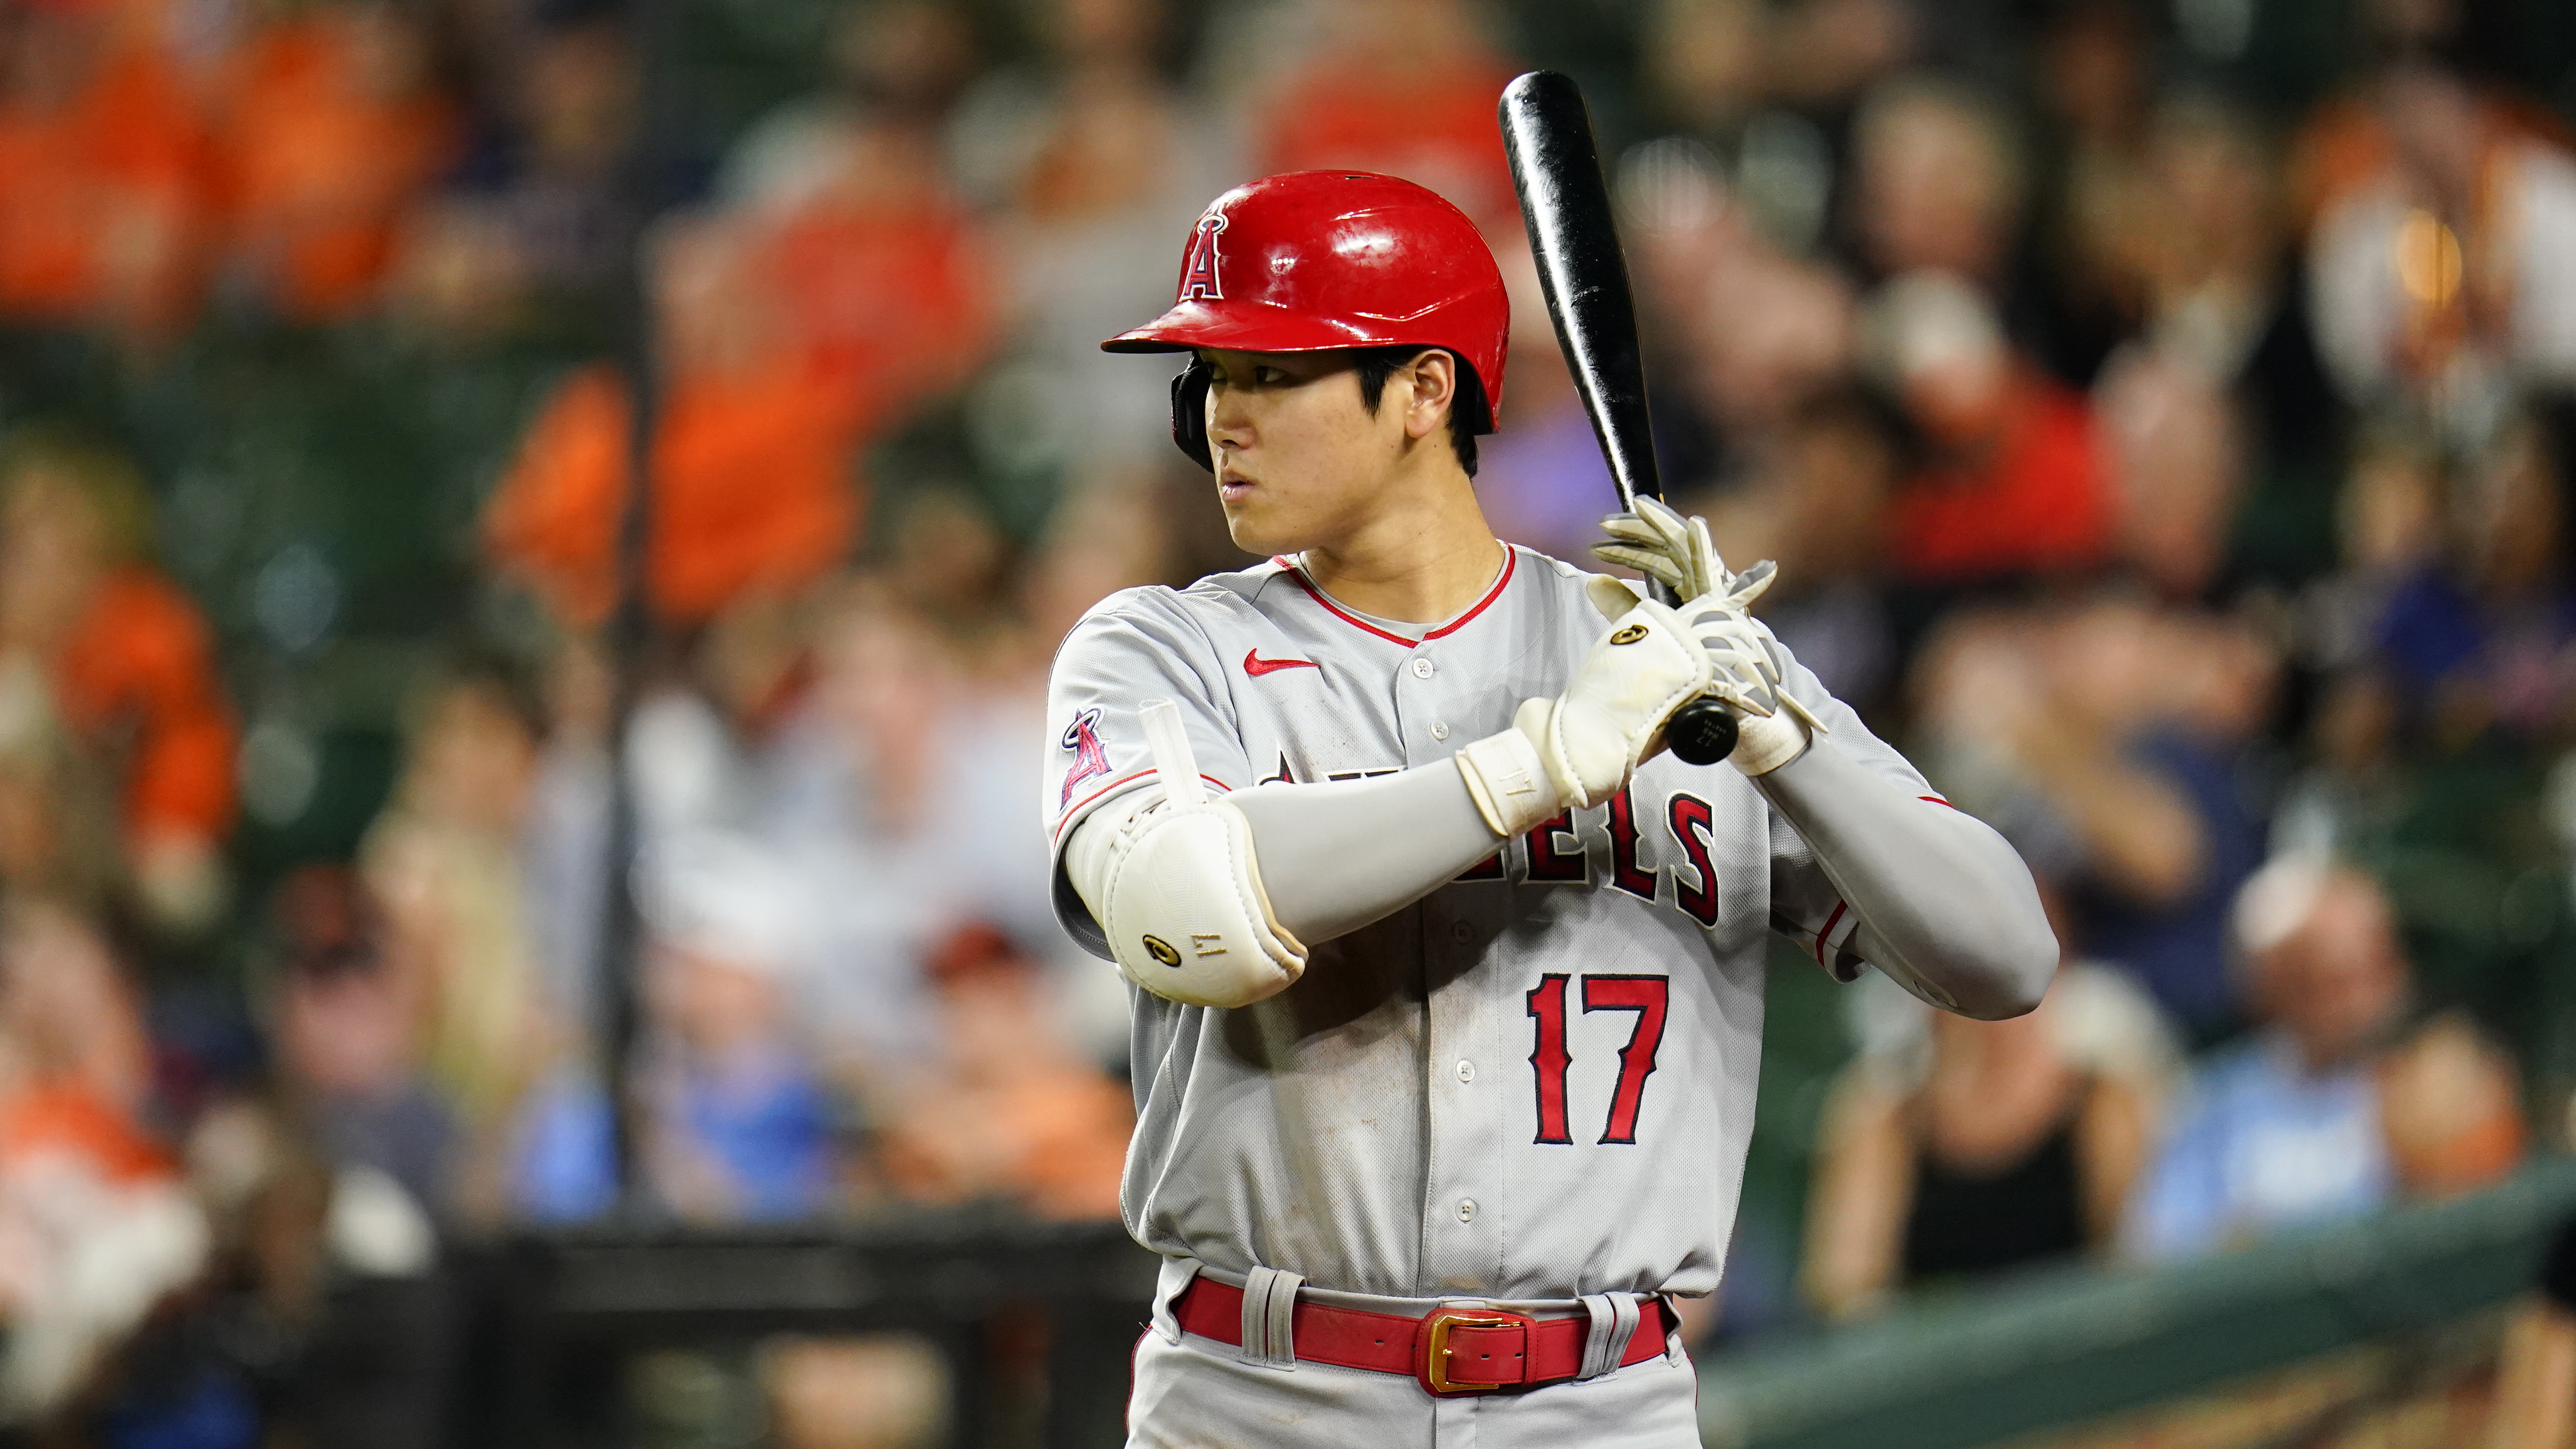 Mike Trout, Shohei Ohtani among starters for MLB All-Star Game